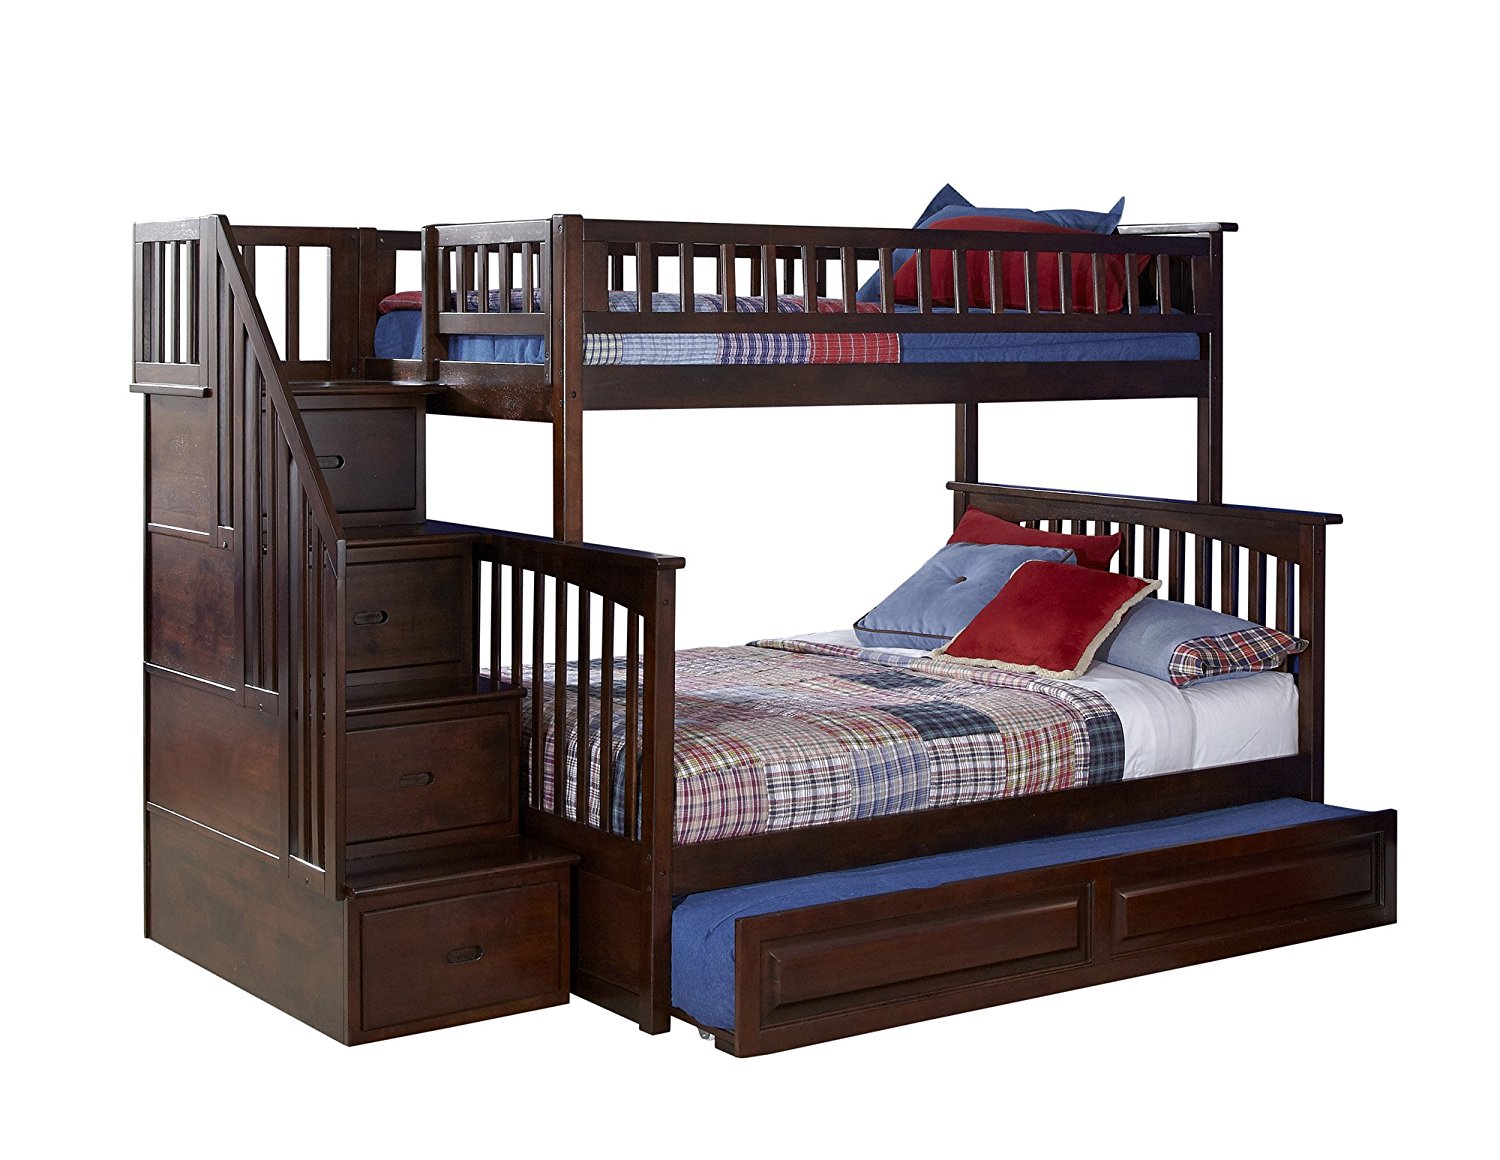 Columbia Staircase Bunk Bed with Trundle Bed, Twin Over Full, Antique Walnut